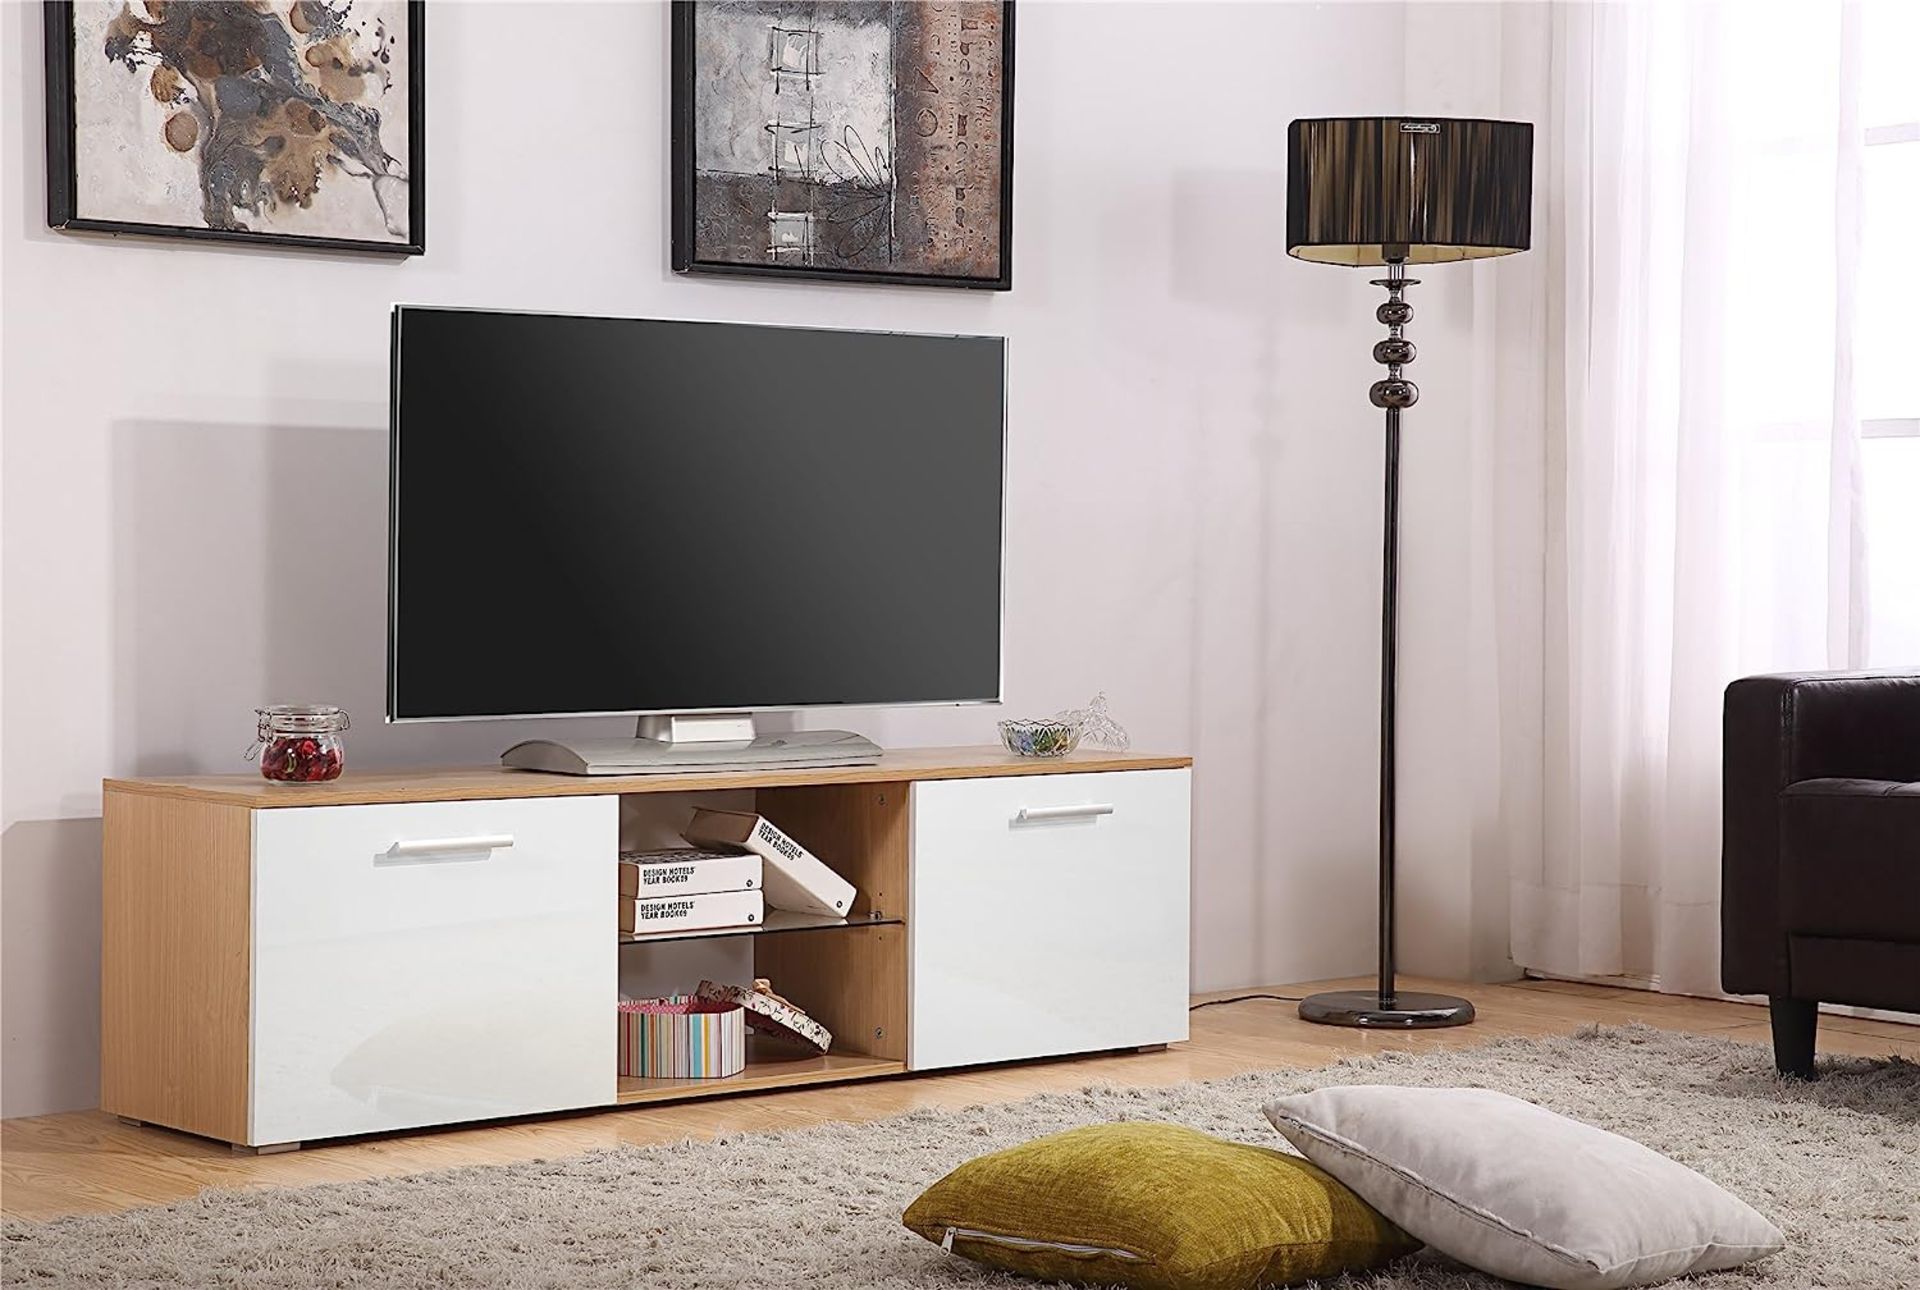 5 X BRAND NEW HARMIN MODERN 160CM TV STAND CABINET UNIT WITH HIGH GLOSS DOORS (WHITE ON OAK)